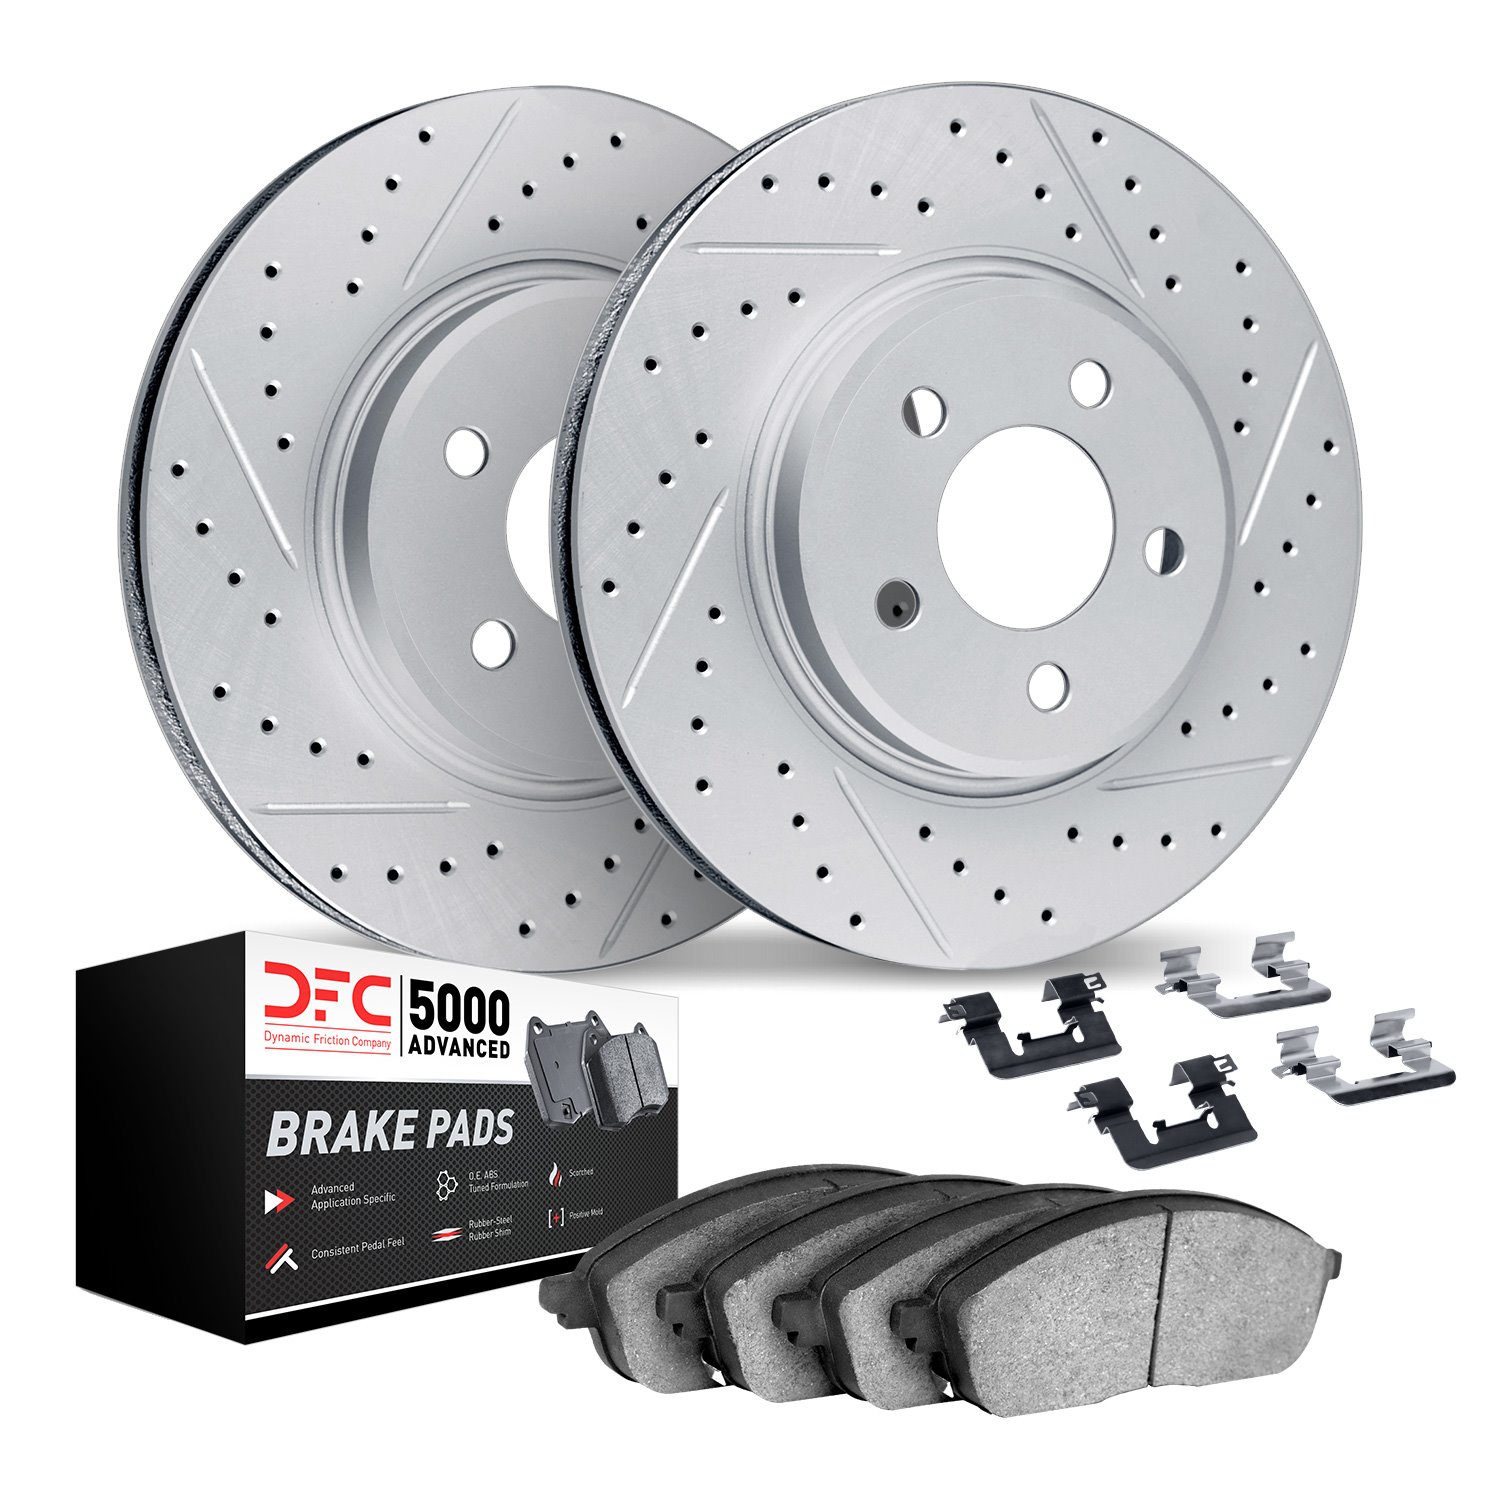 2512-31064 Geoperformance Drilled/Slotted Rotors w/5000 Advanced Brake Pads Kit & Hardware, 2011-2016 BMW, Position: Rear